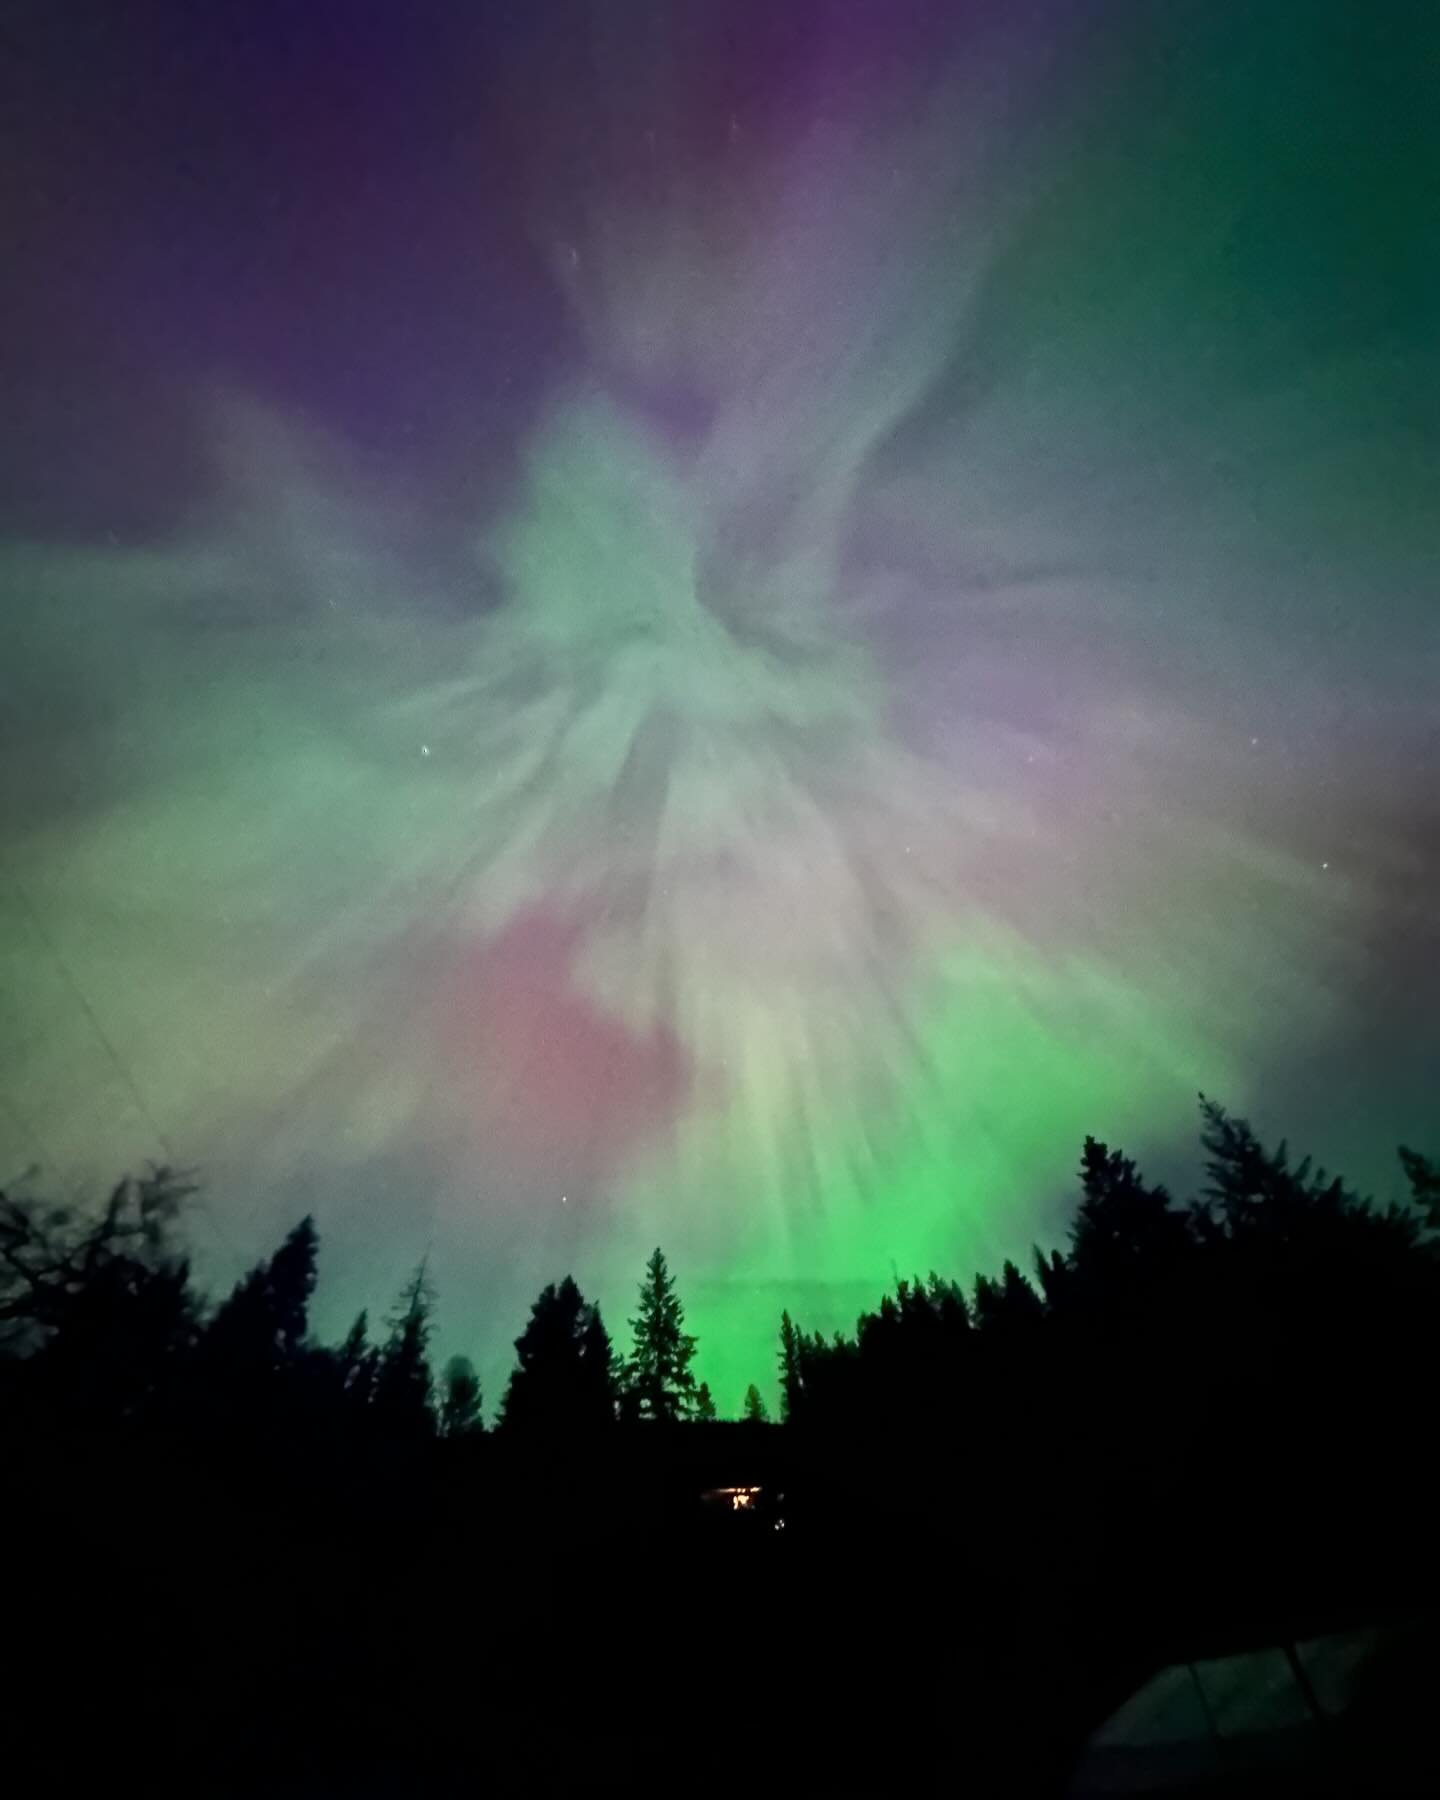 Over our house last night. Total magic. The phone camera automatically captured a heightened version of reality, so what the naked eye saw was more muted than this, but was still awe inspiring to lay out, cuddling my kid under a blanket, and marvel a